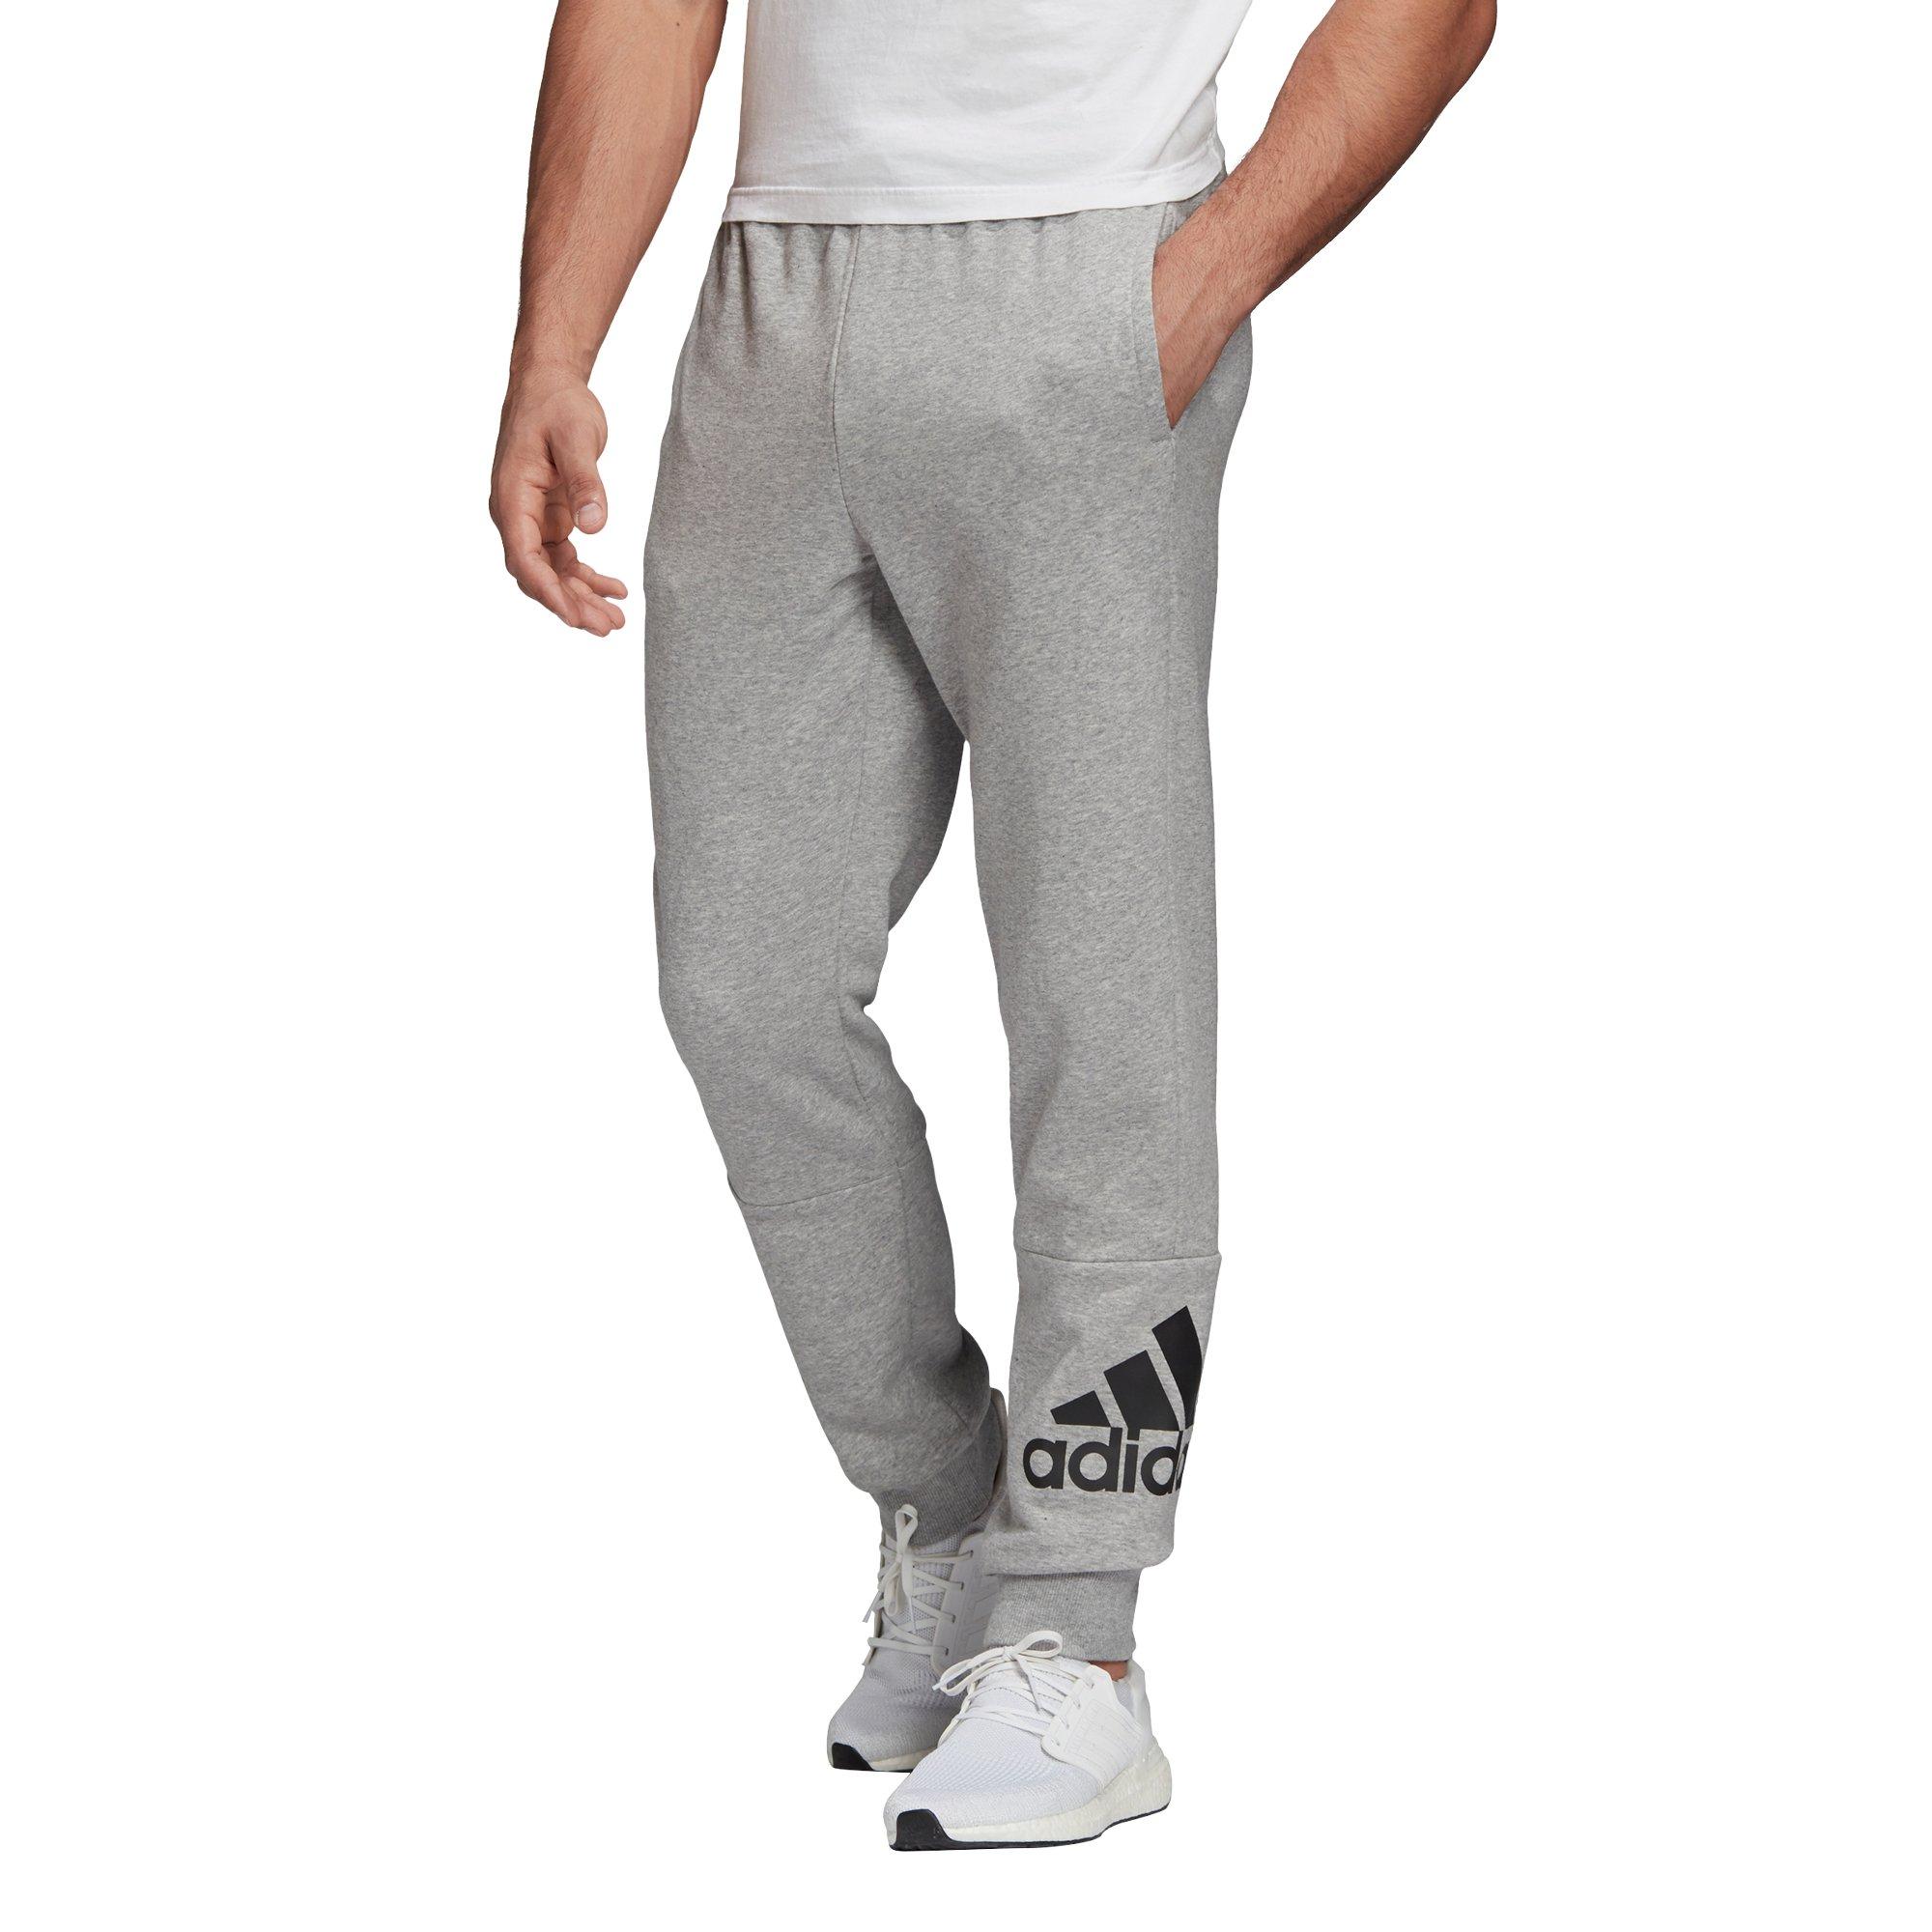 adidas french terry sweatpants